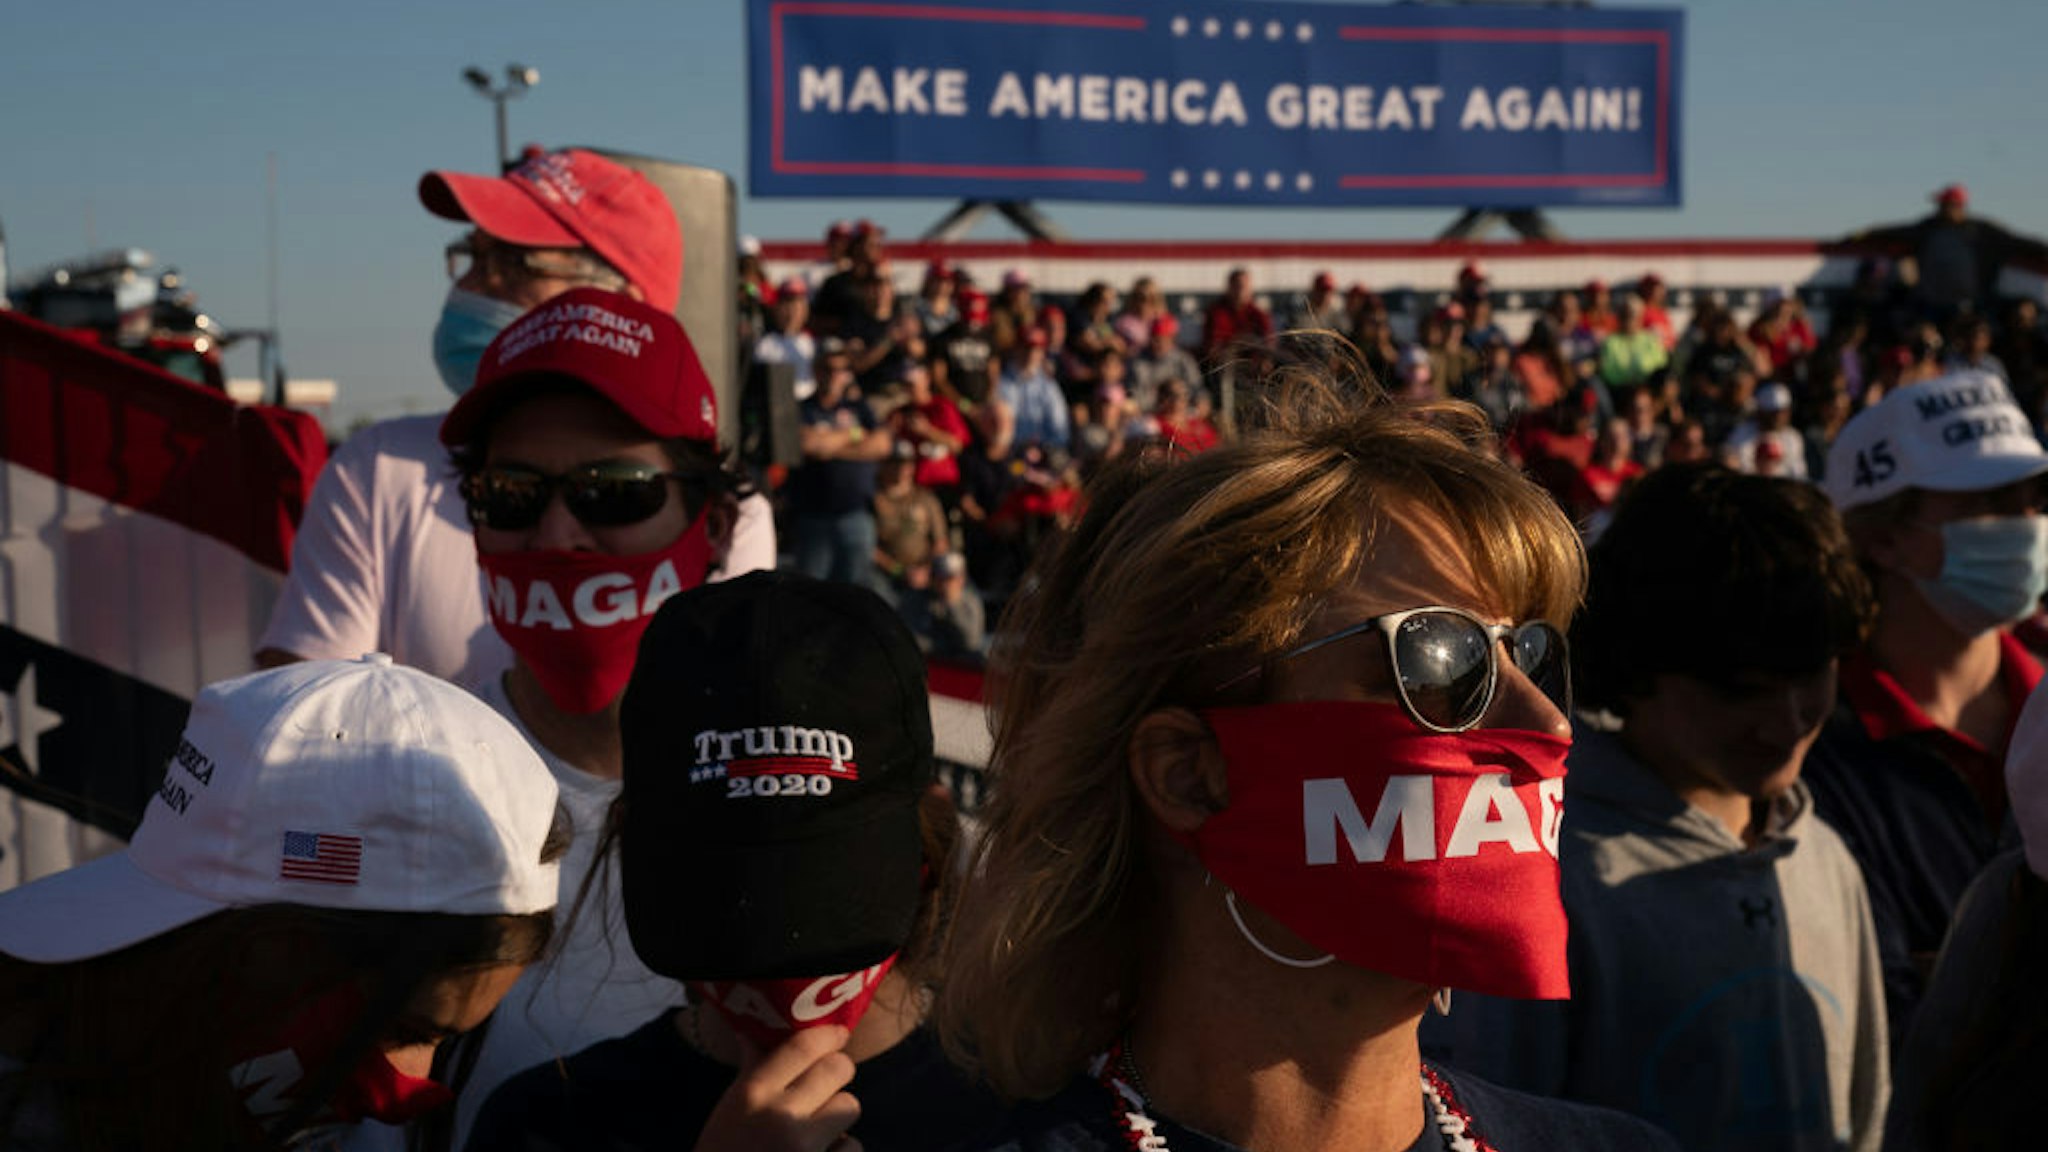 Attendees wait to hear President Trump speaks at a campaign rally on October 16, 2020 in Macon, Georgia. President Trump continues to campaign against Democratic presidential nominee Joe Biden with 18 days until election day. (Photo by Elijah Nouvelage/Getty Images)